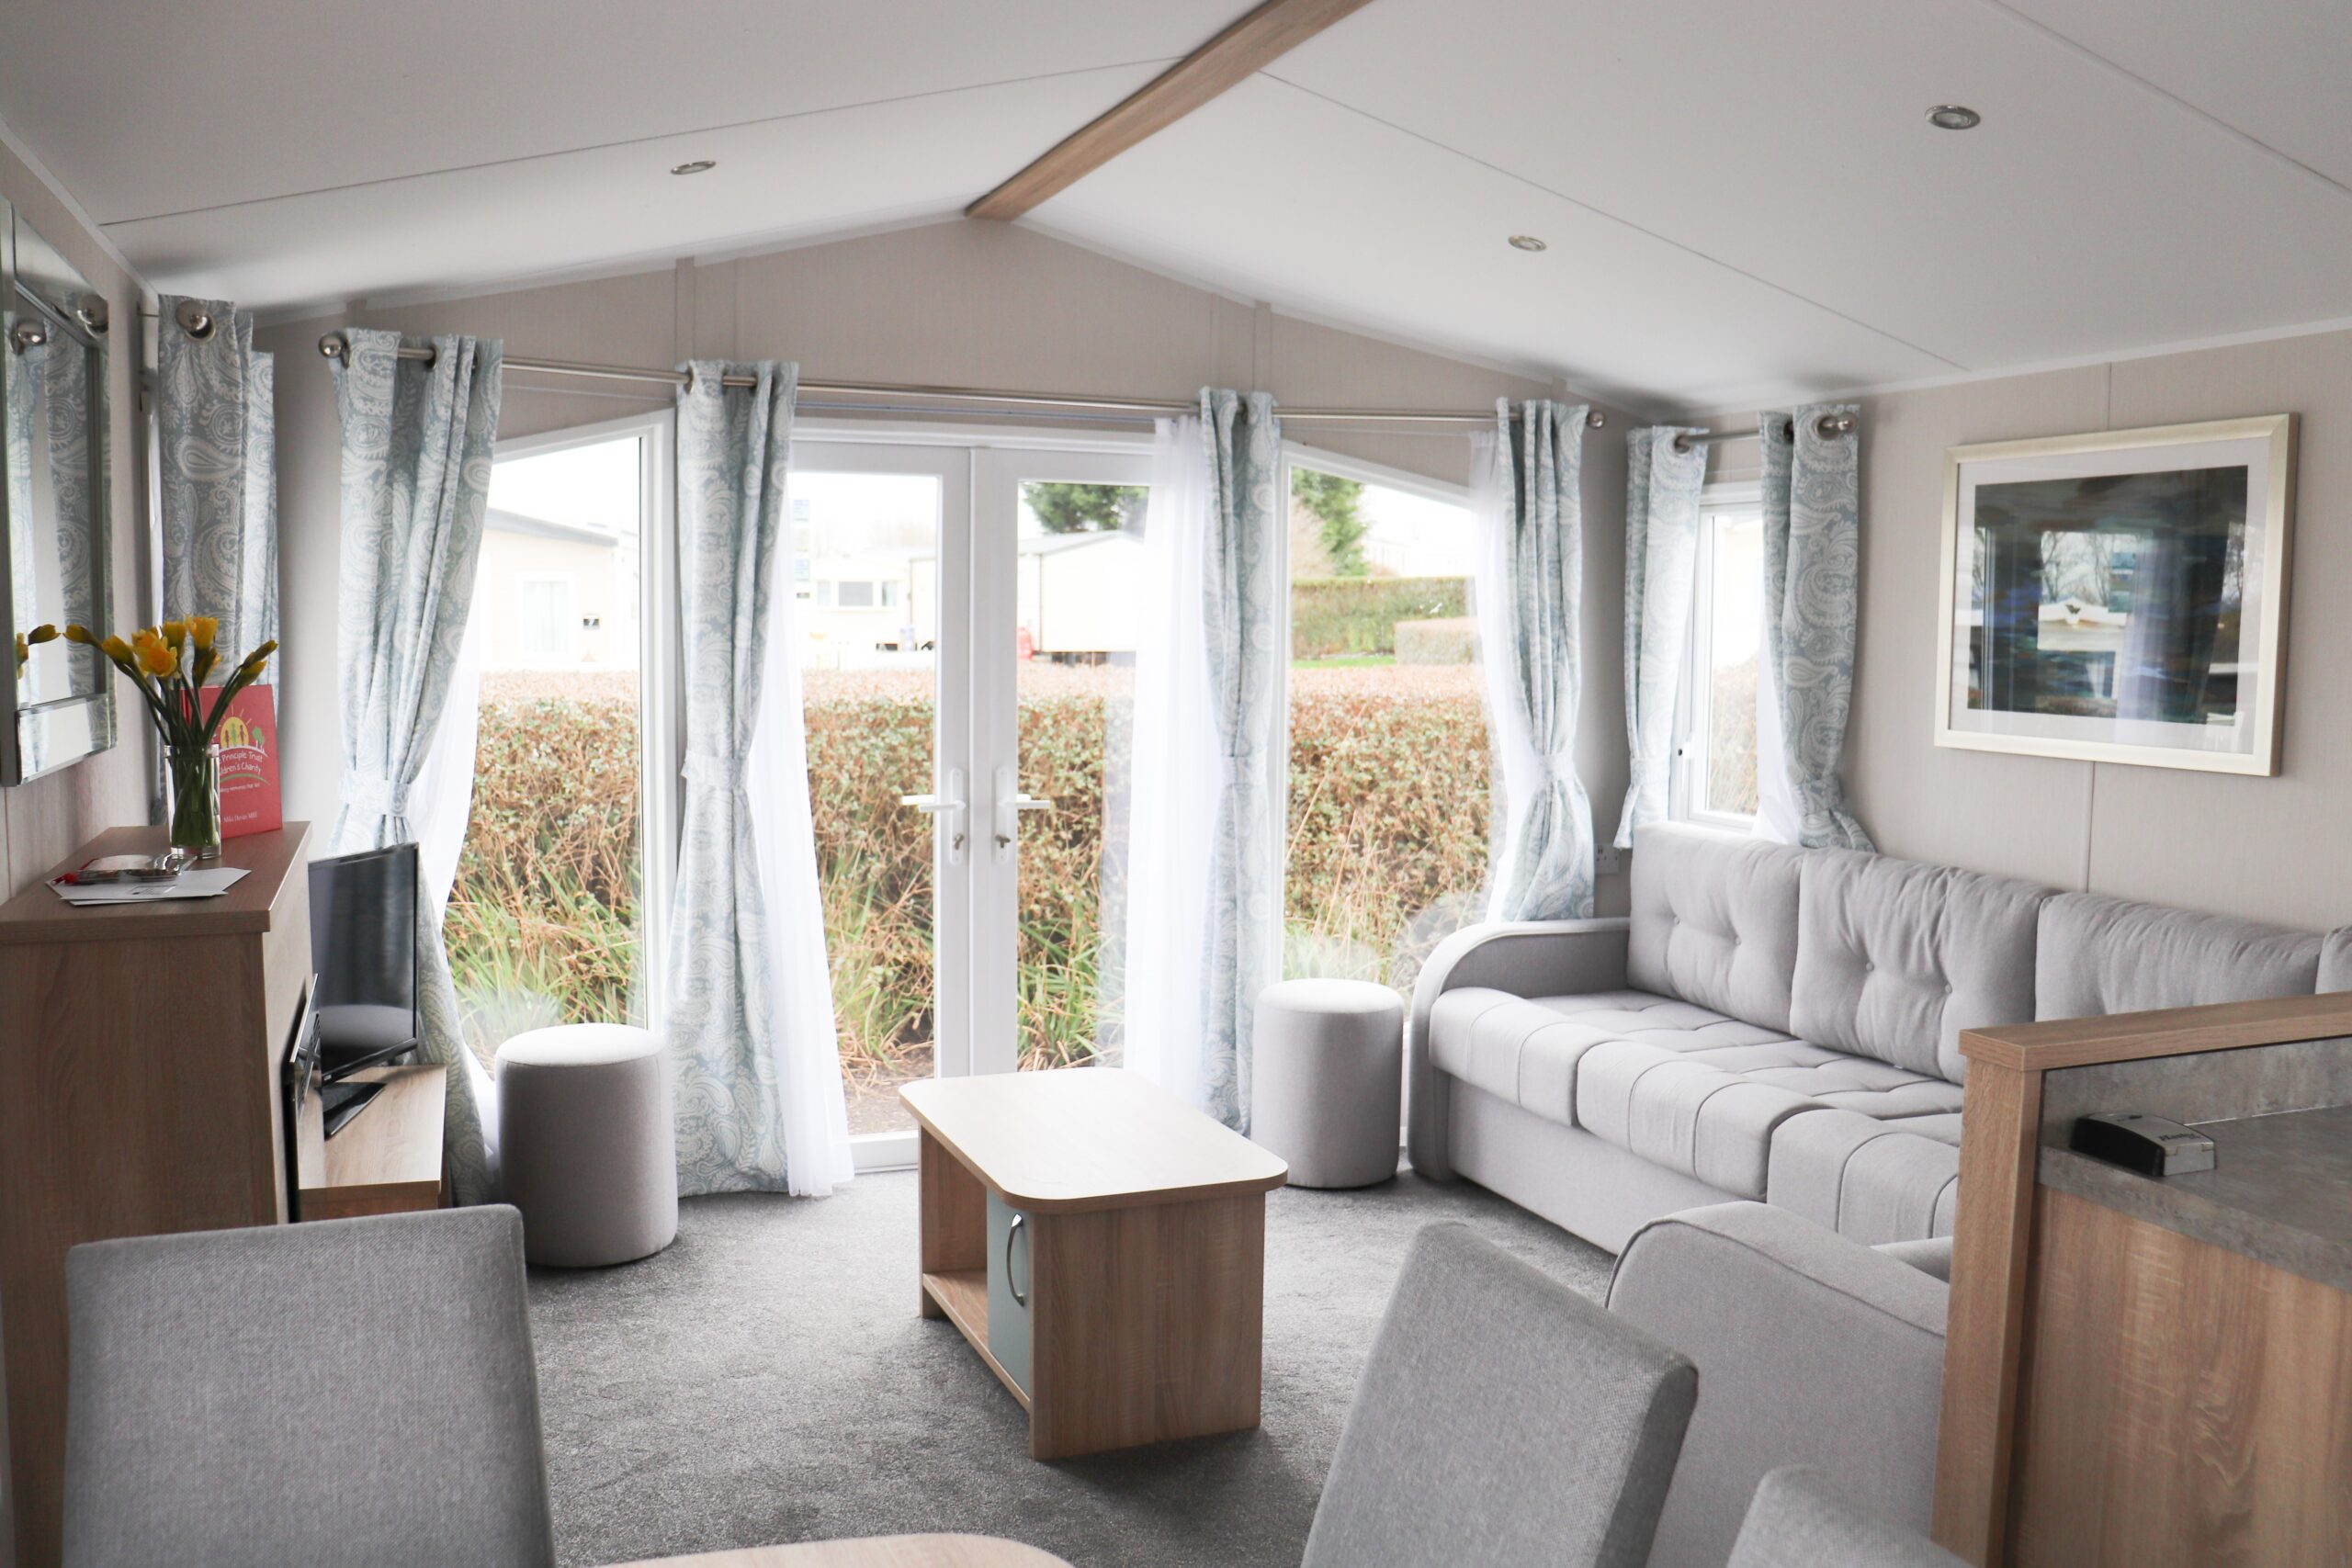 The Principle Trust has new holiday homes to offer